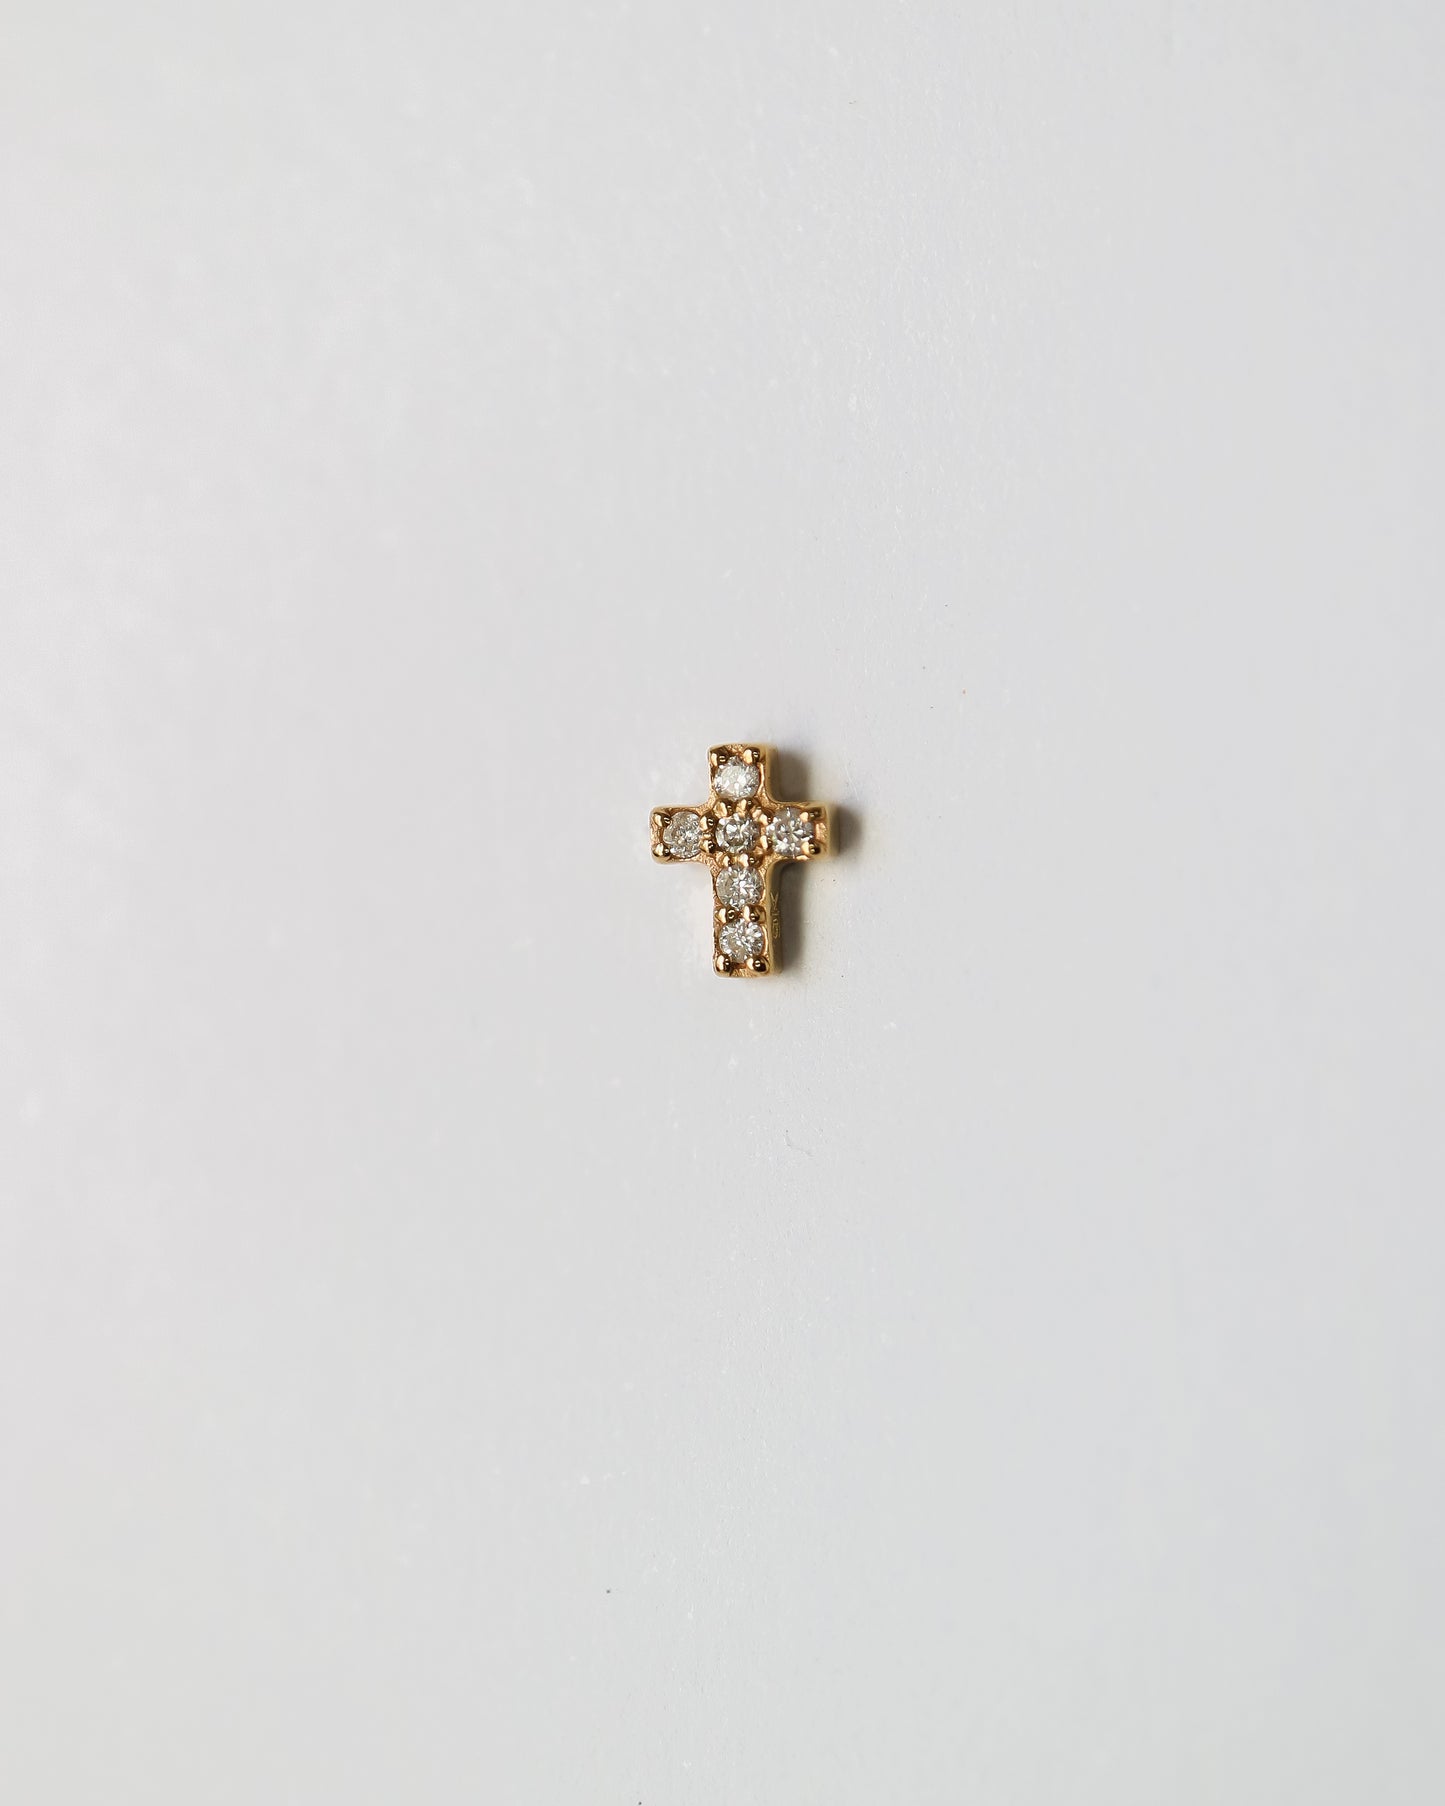 9ct gold and diamonds crucifix conch piercing stud